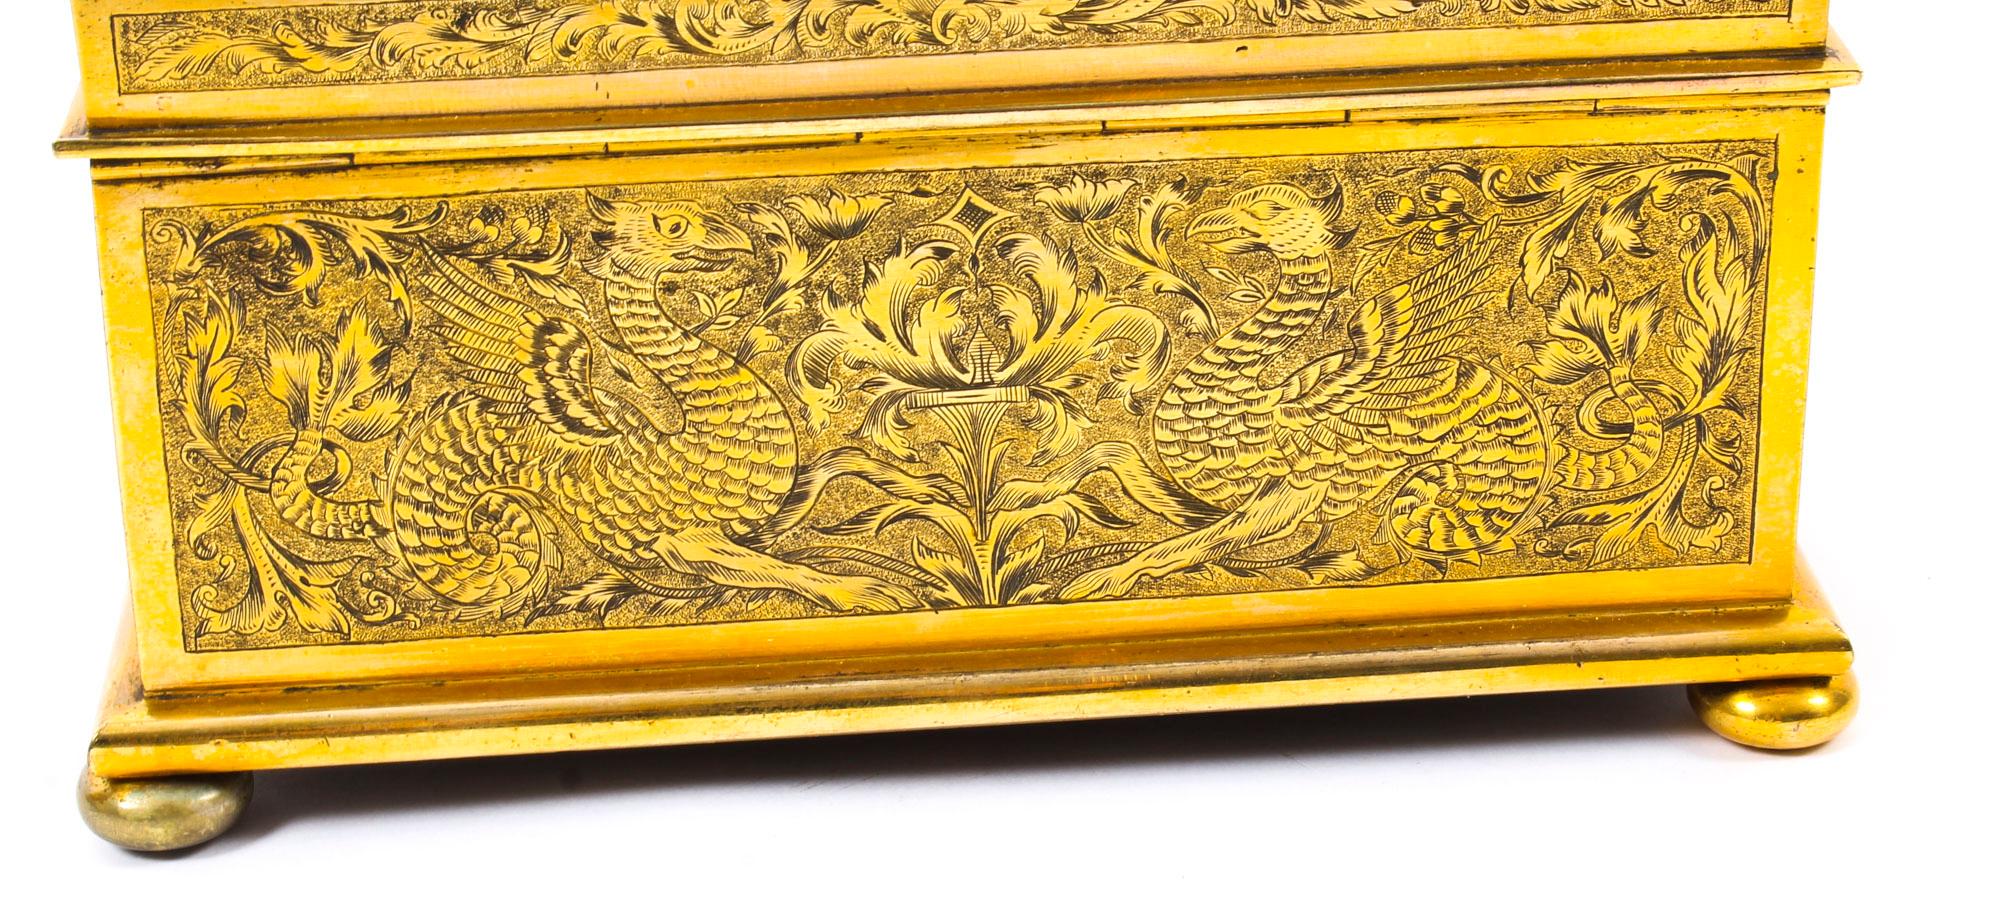 Ormolu Sevres Jewel Casket Exhibited at the Great Exhibition 1851, 19th Century 6